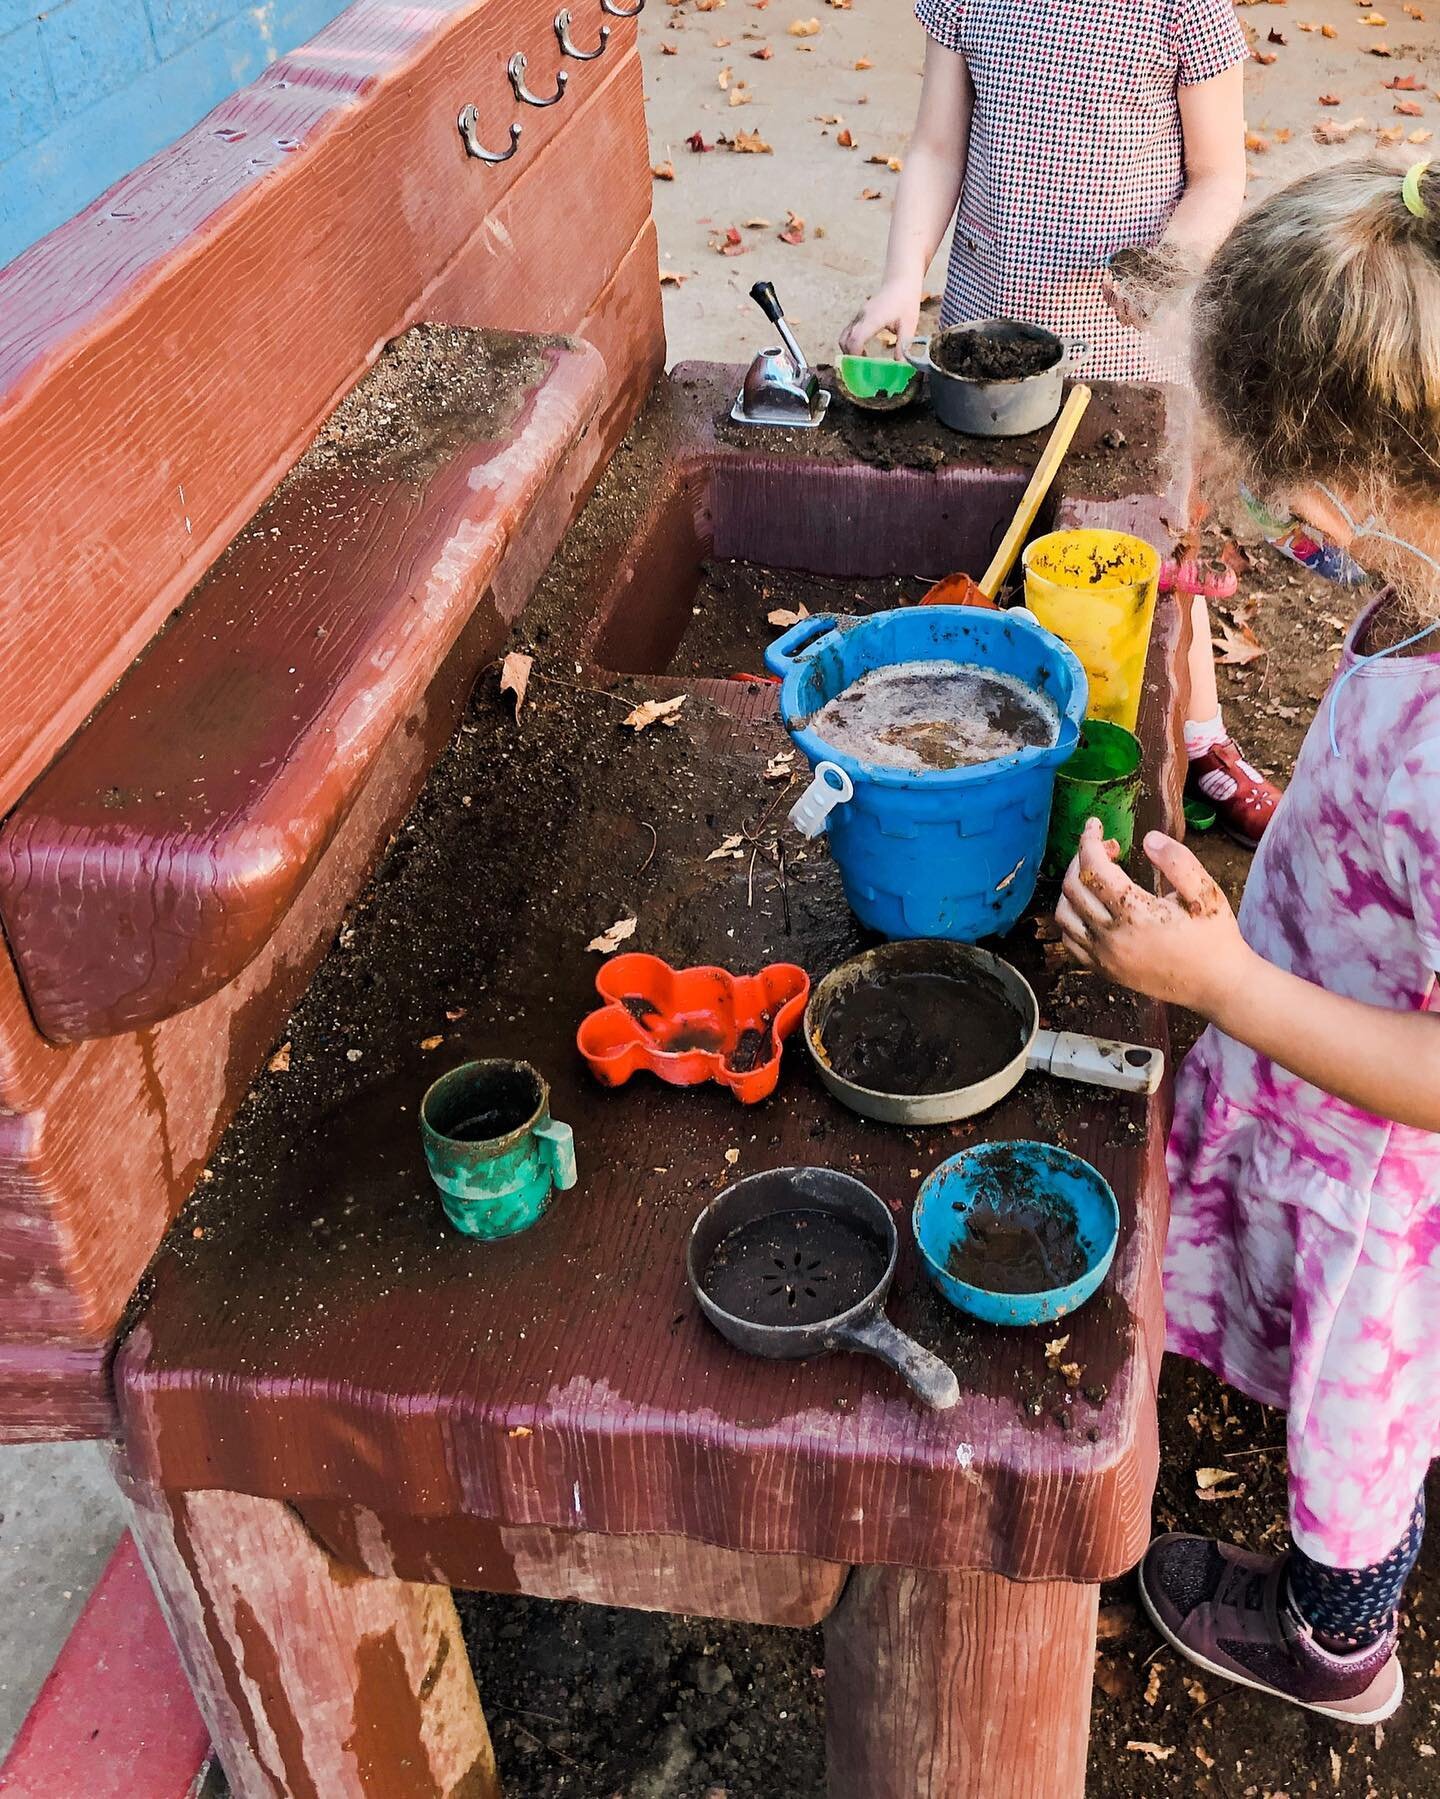 Cooking up some fun in the mud kitchen 🥘🥣☕️

Image Description: Two students stand at a counter with a sink. There are colorful pots and vessels filled with mud.

#preschool #MudKitchen #preschoolActivities #EarlyChildhoodEducation #TactileLearning